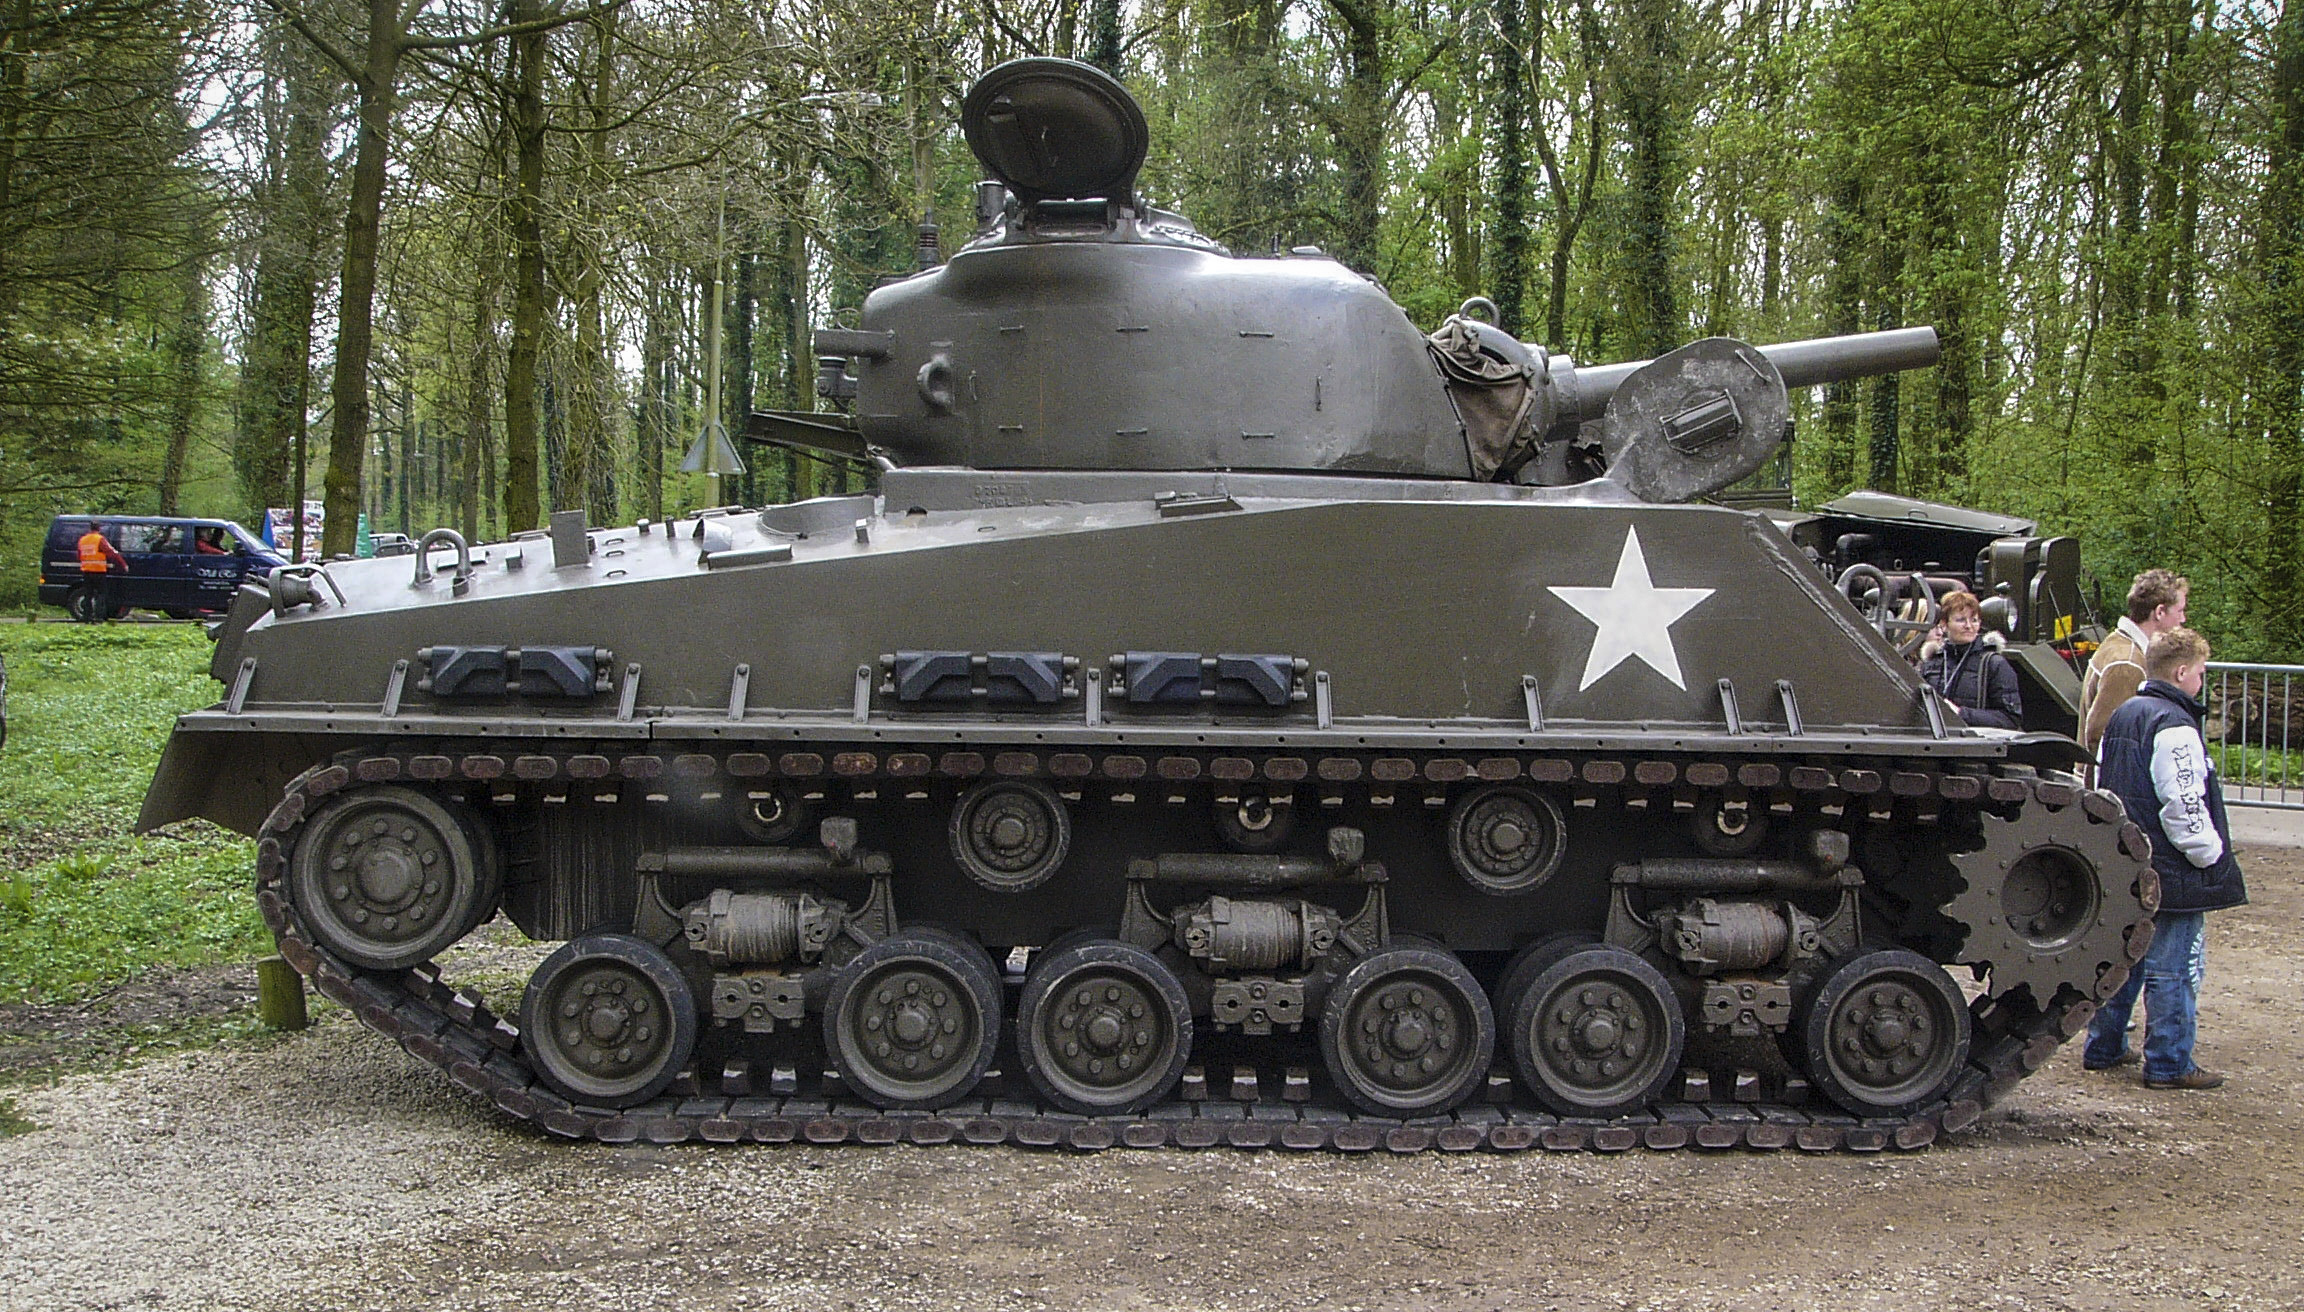 a large tank sitting in the middle of a forest